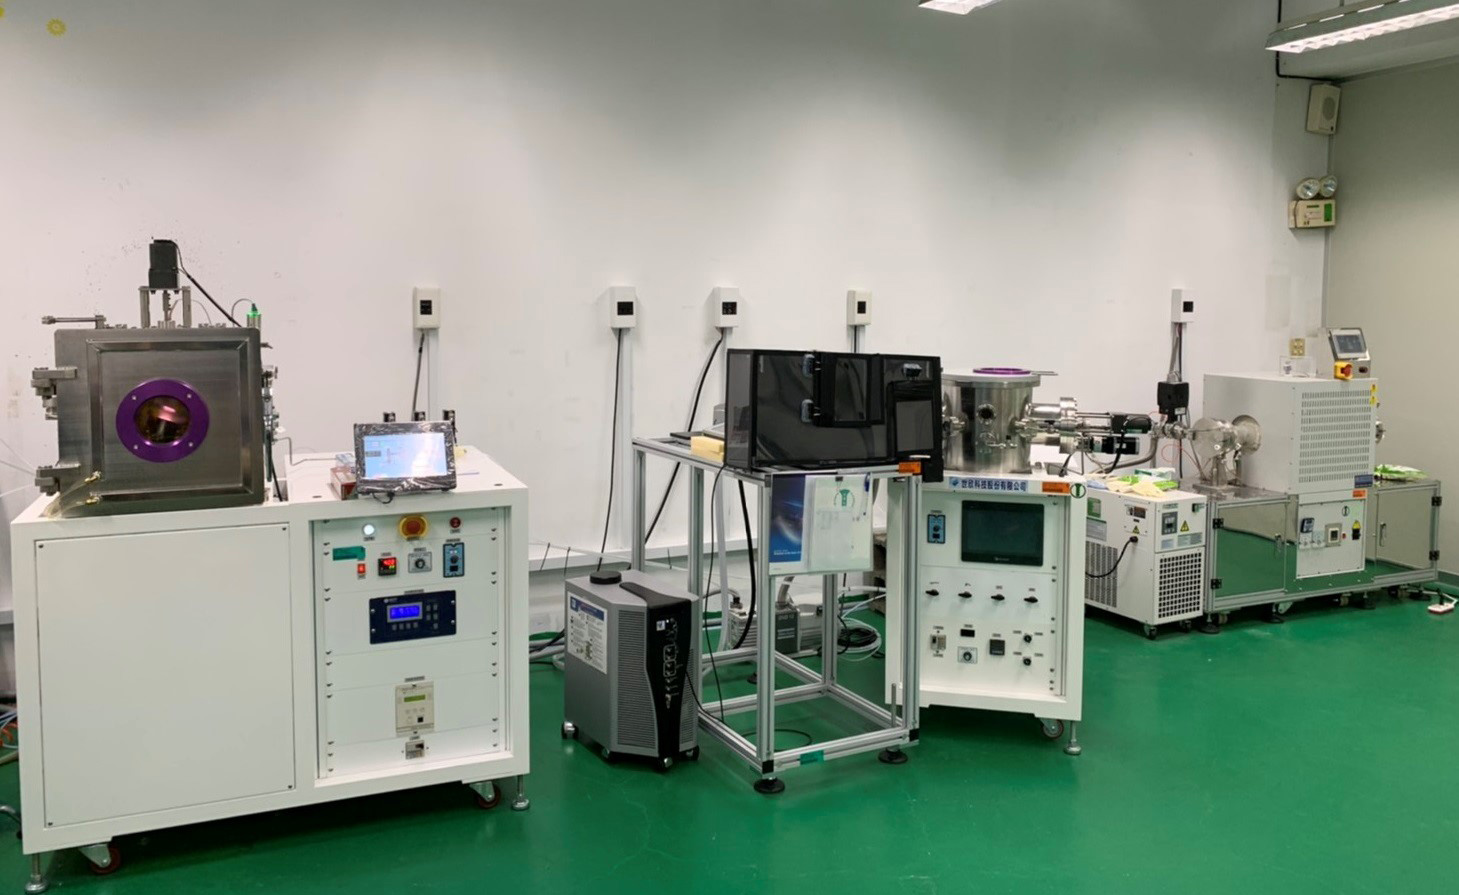 Optoelectronic Materials and Microstructure Analysis Laboratory